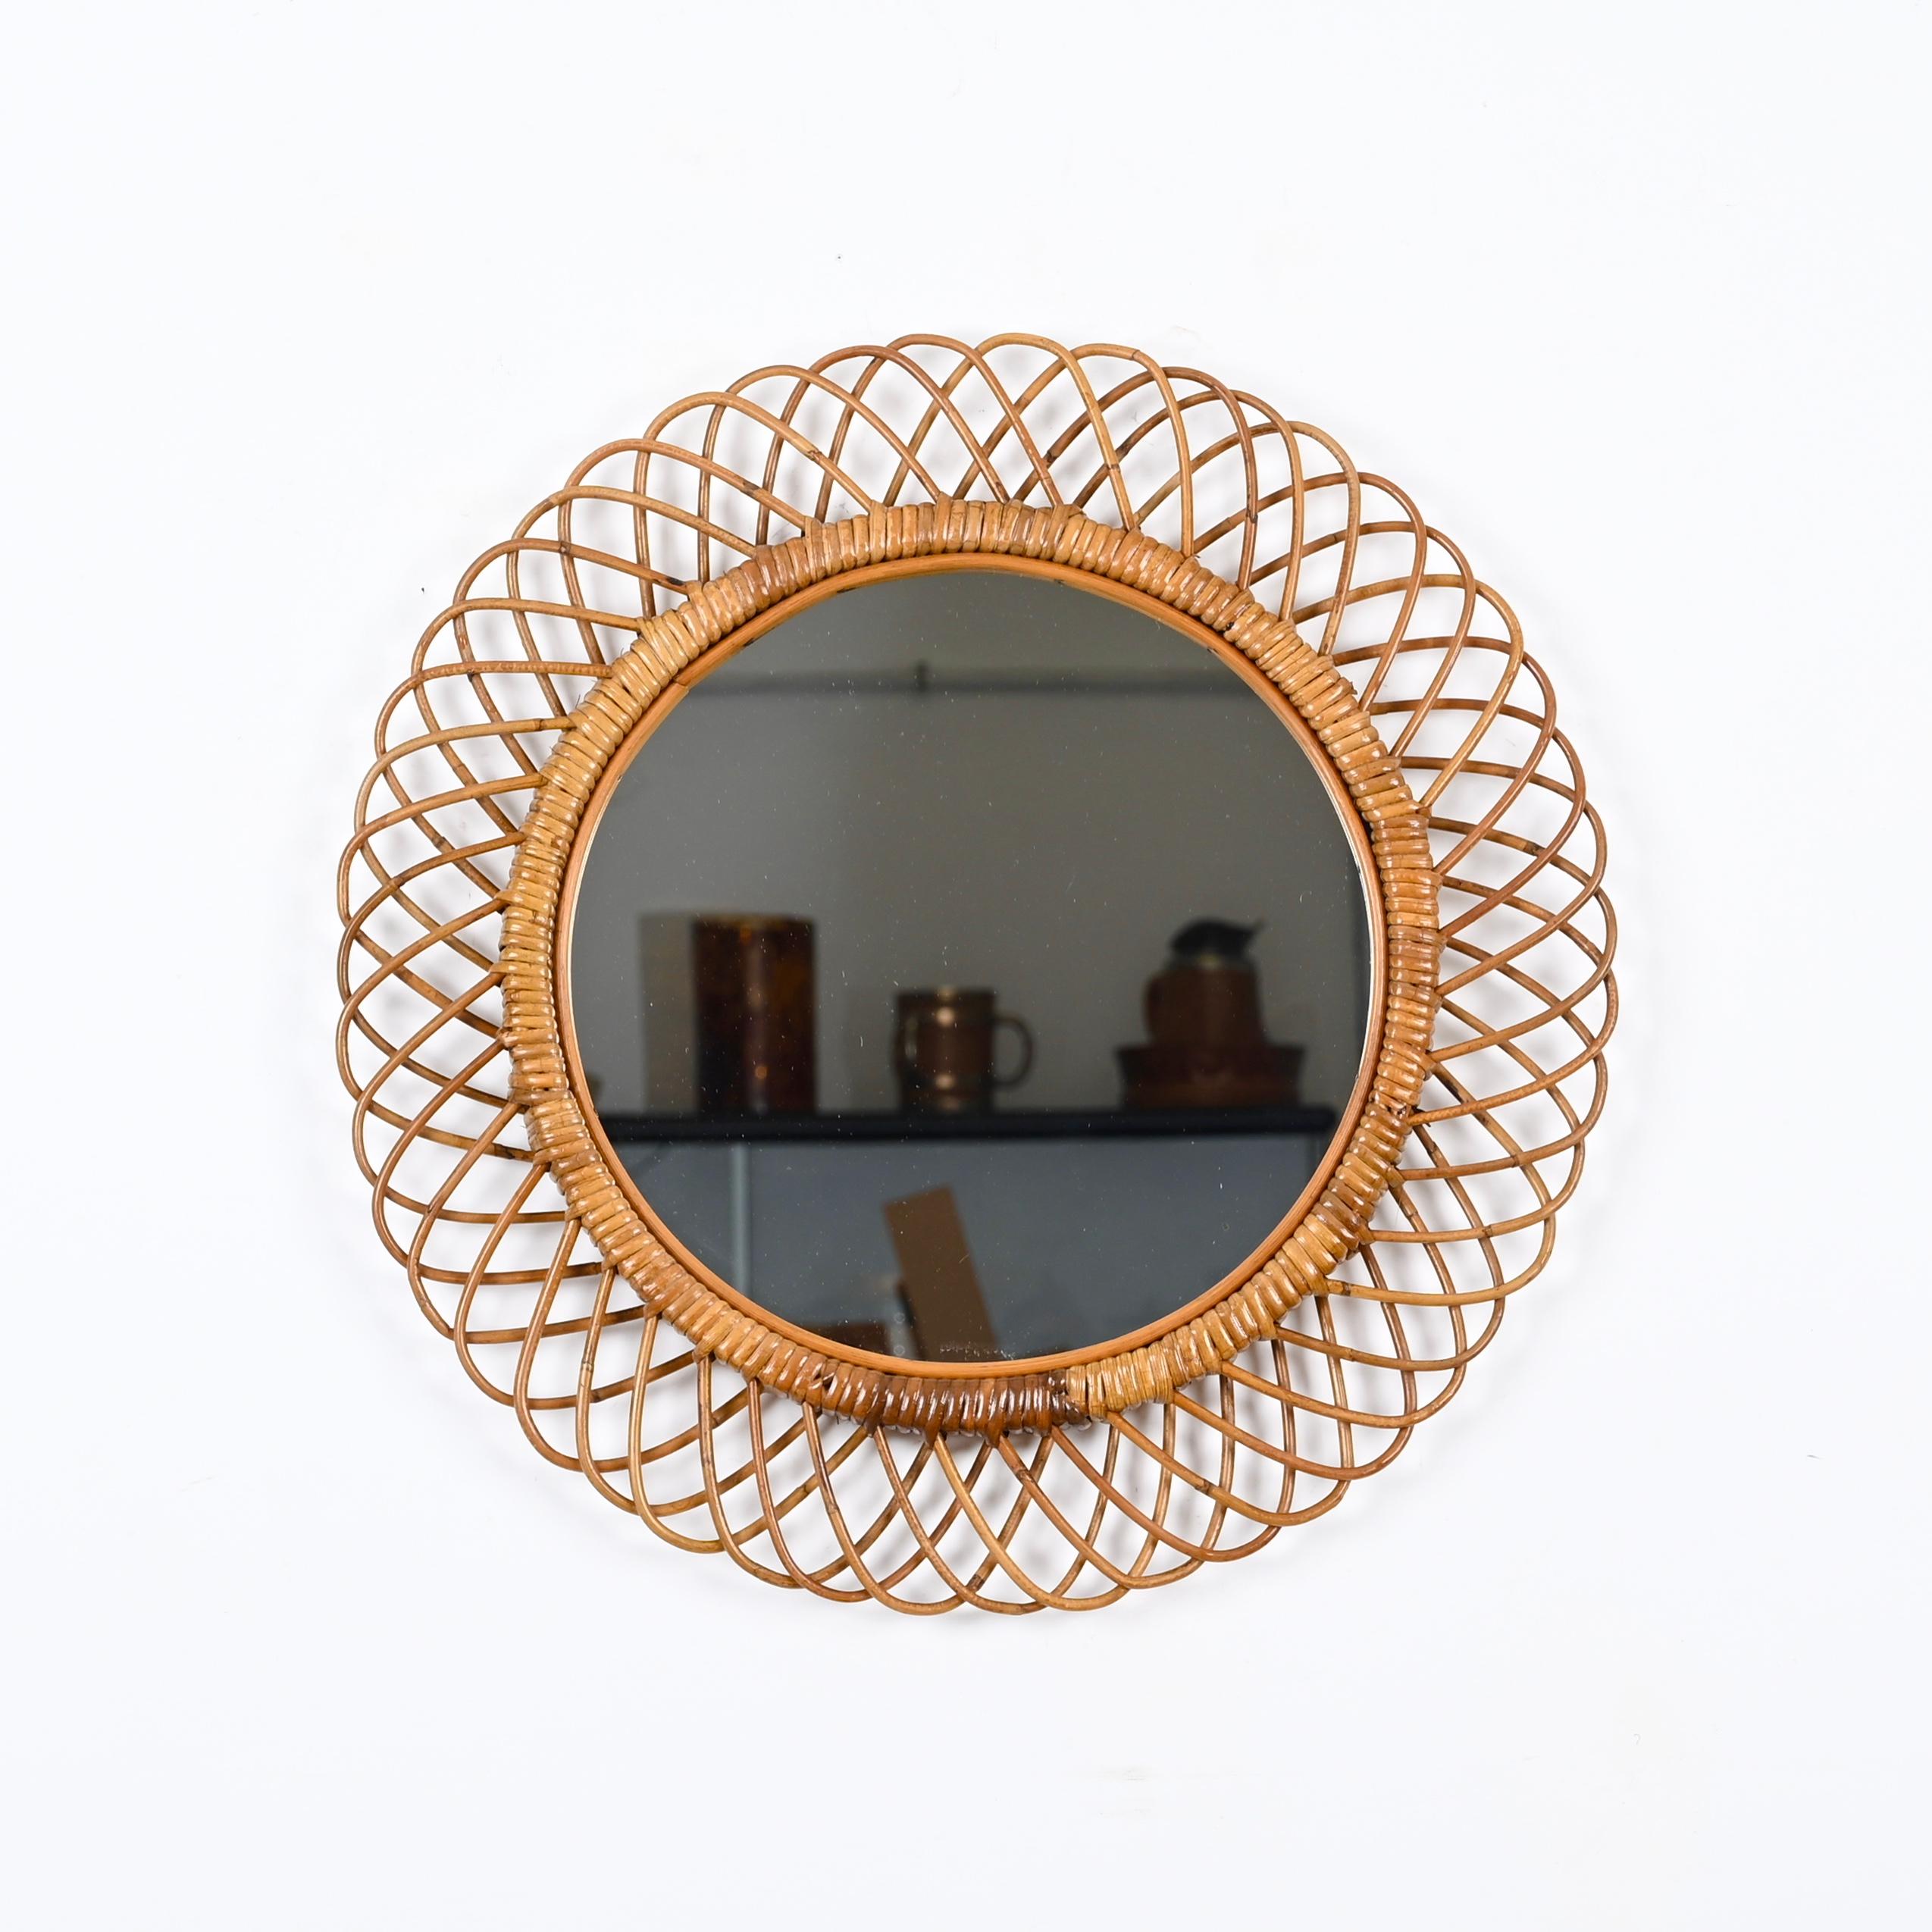 Mid-20th Century Franco Albini French Riviera Round Mirror in Rattan and Wicker, Italy 1960s For Sale